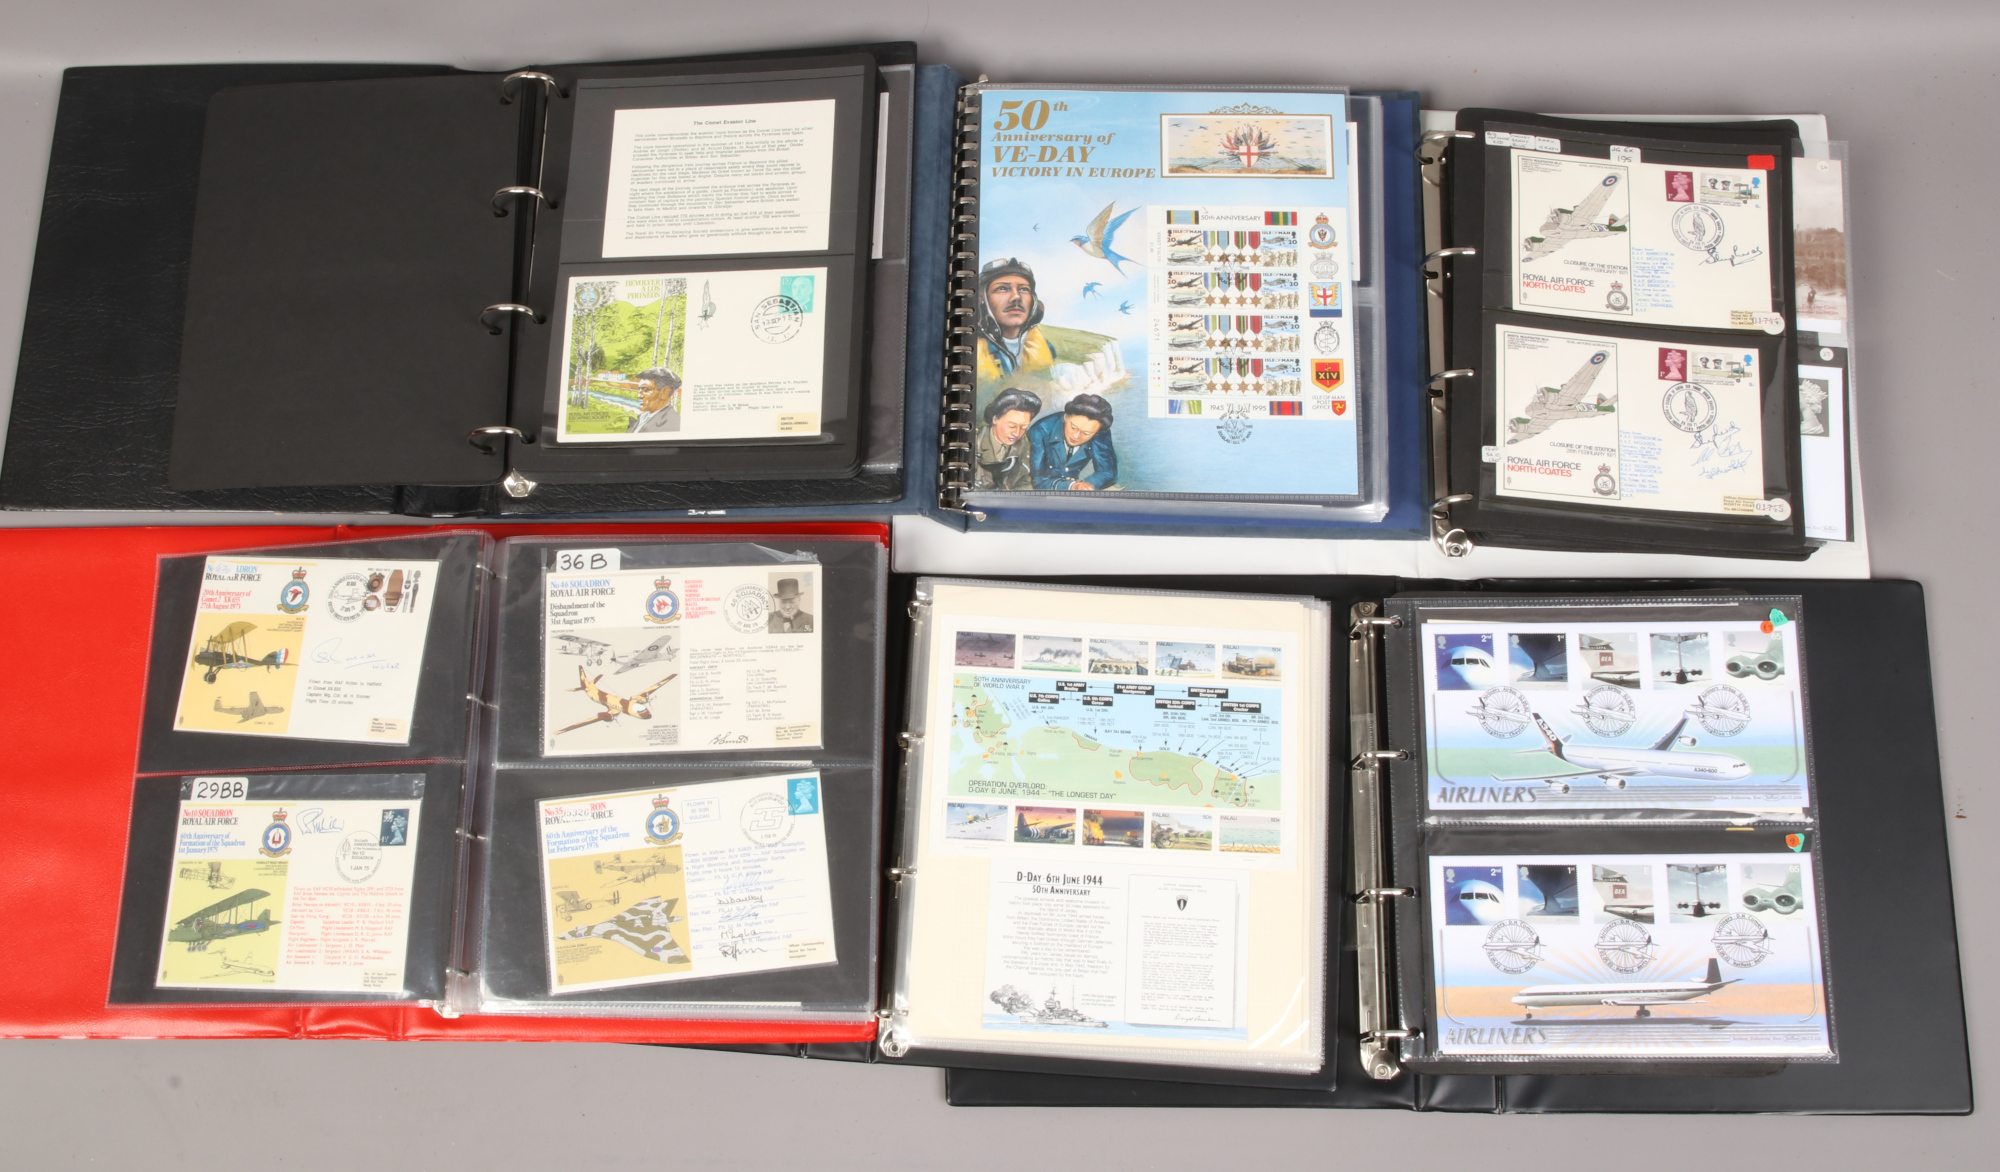 Six folders of first day covers including 50th anniversary of VE - Day signed and unsigned, escaping